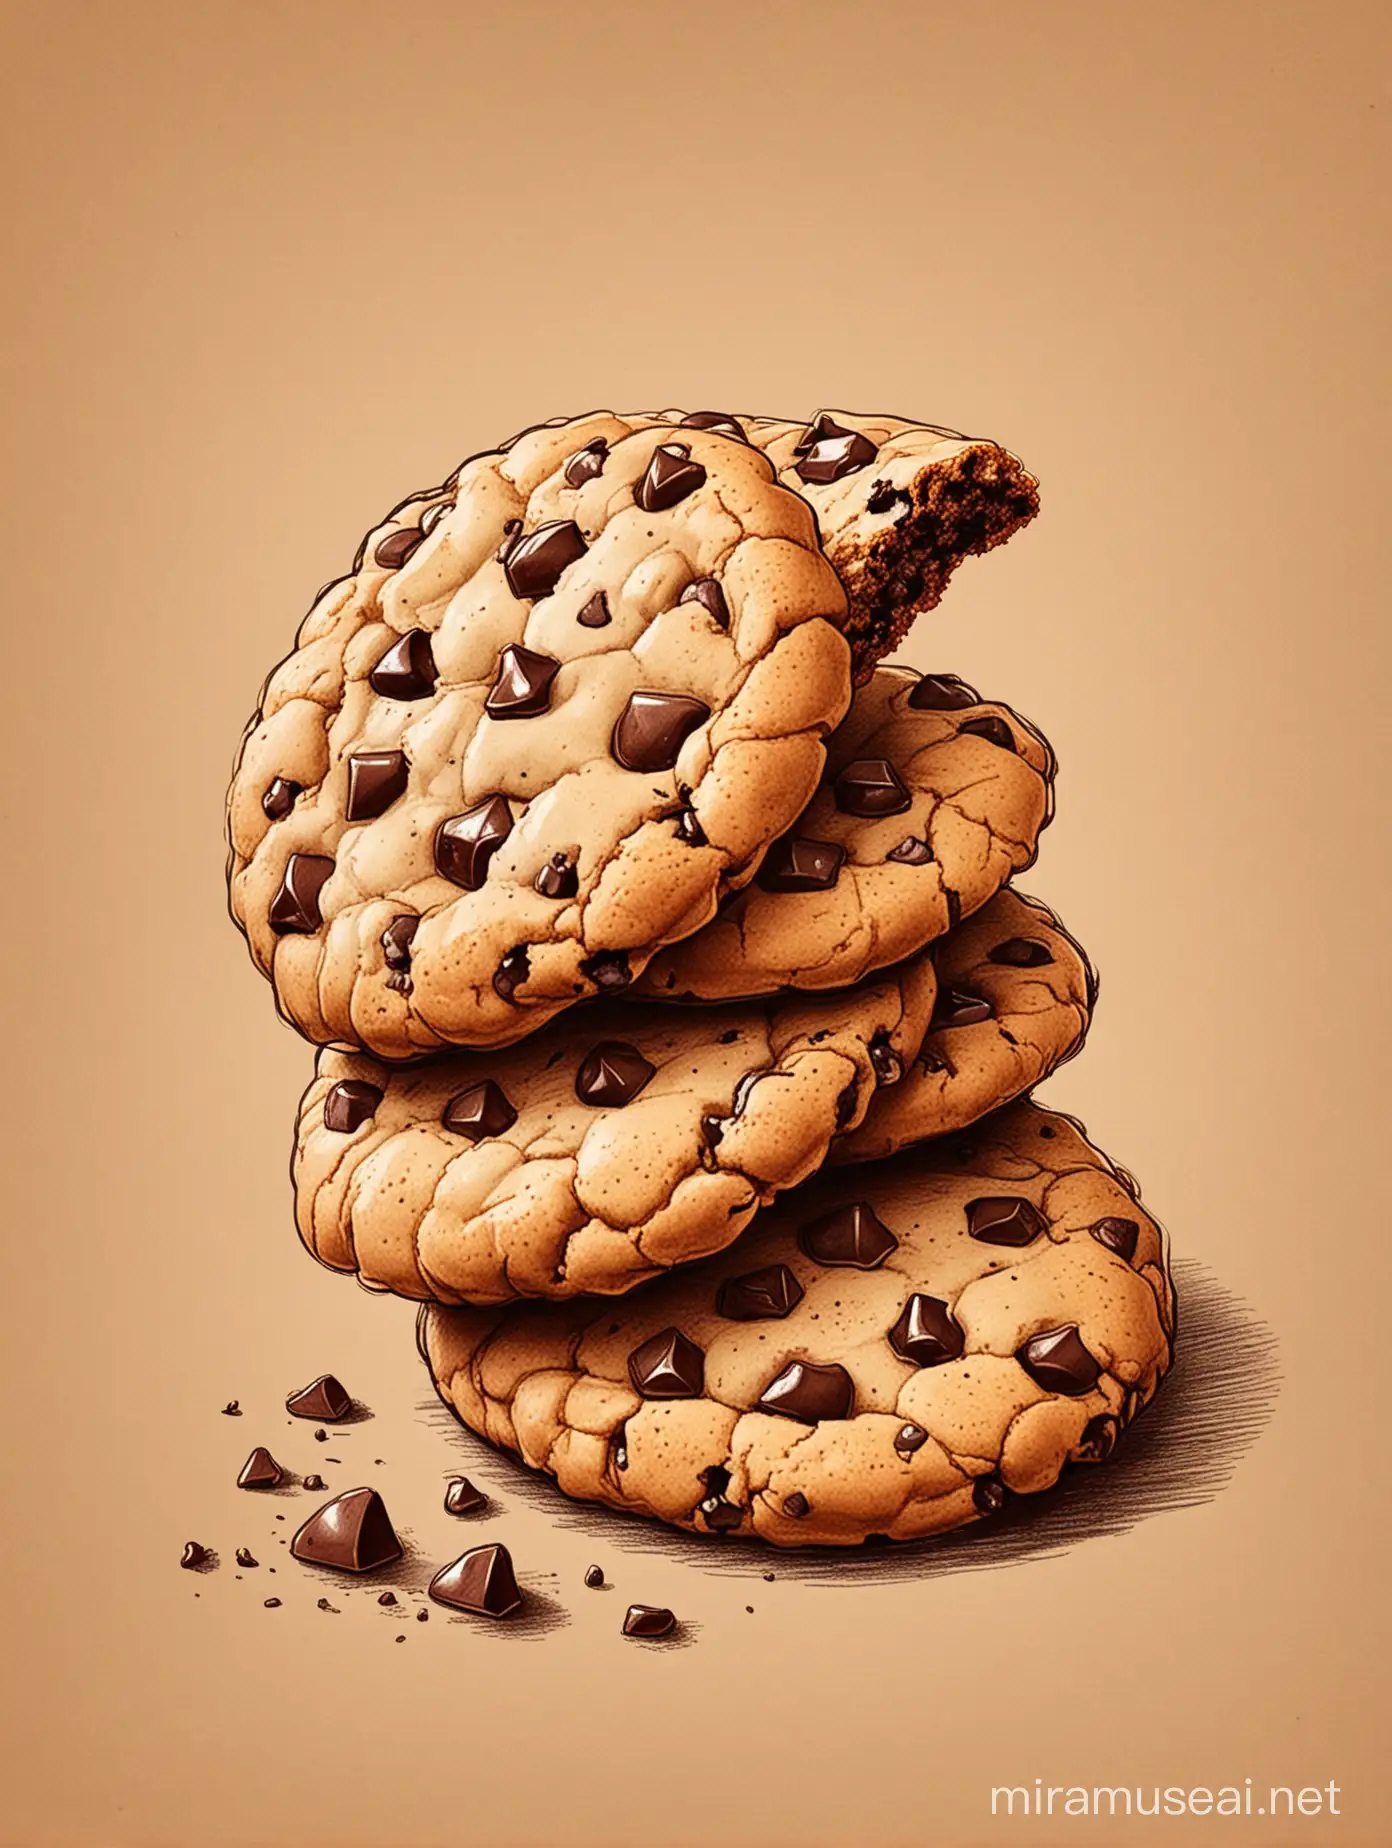 Chocolate Chip Cookies Sketch Delicious Treats on Brown Background